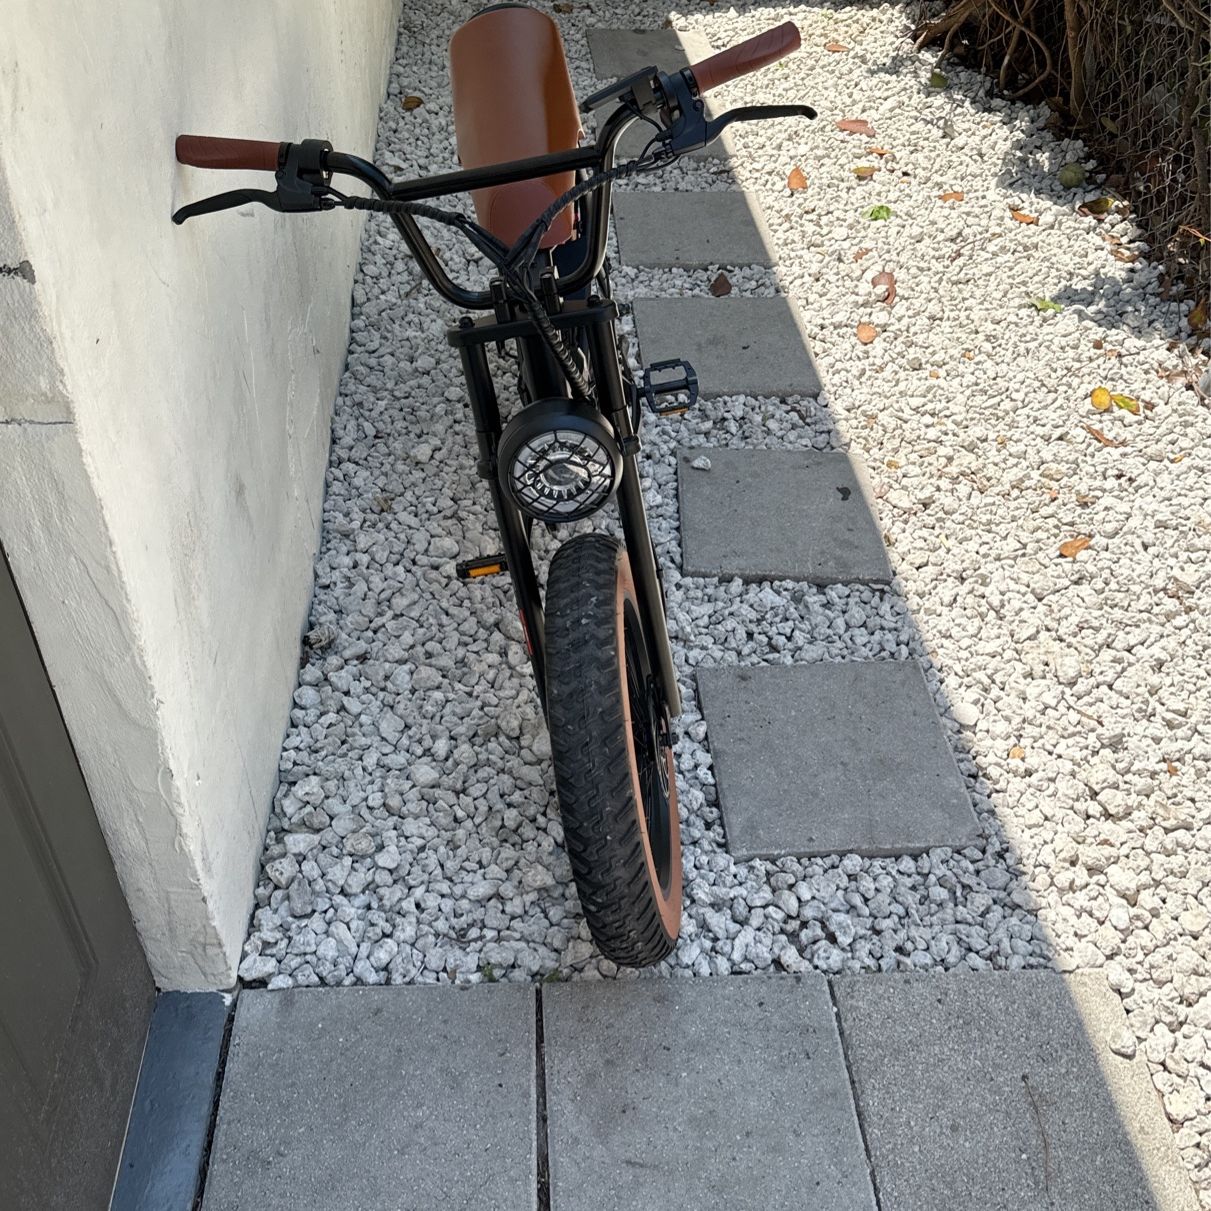 Electric Bike For Sale “HUFFY” MAT BLACK AND BROWN 